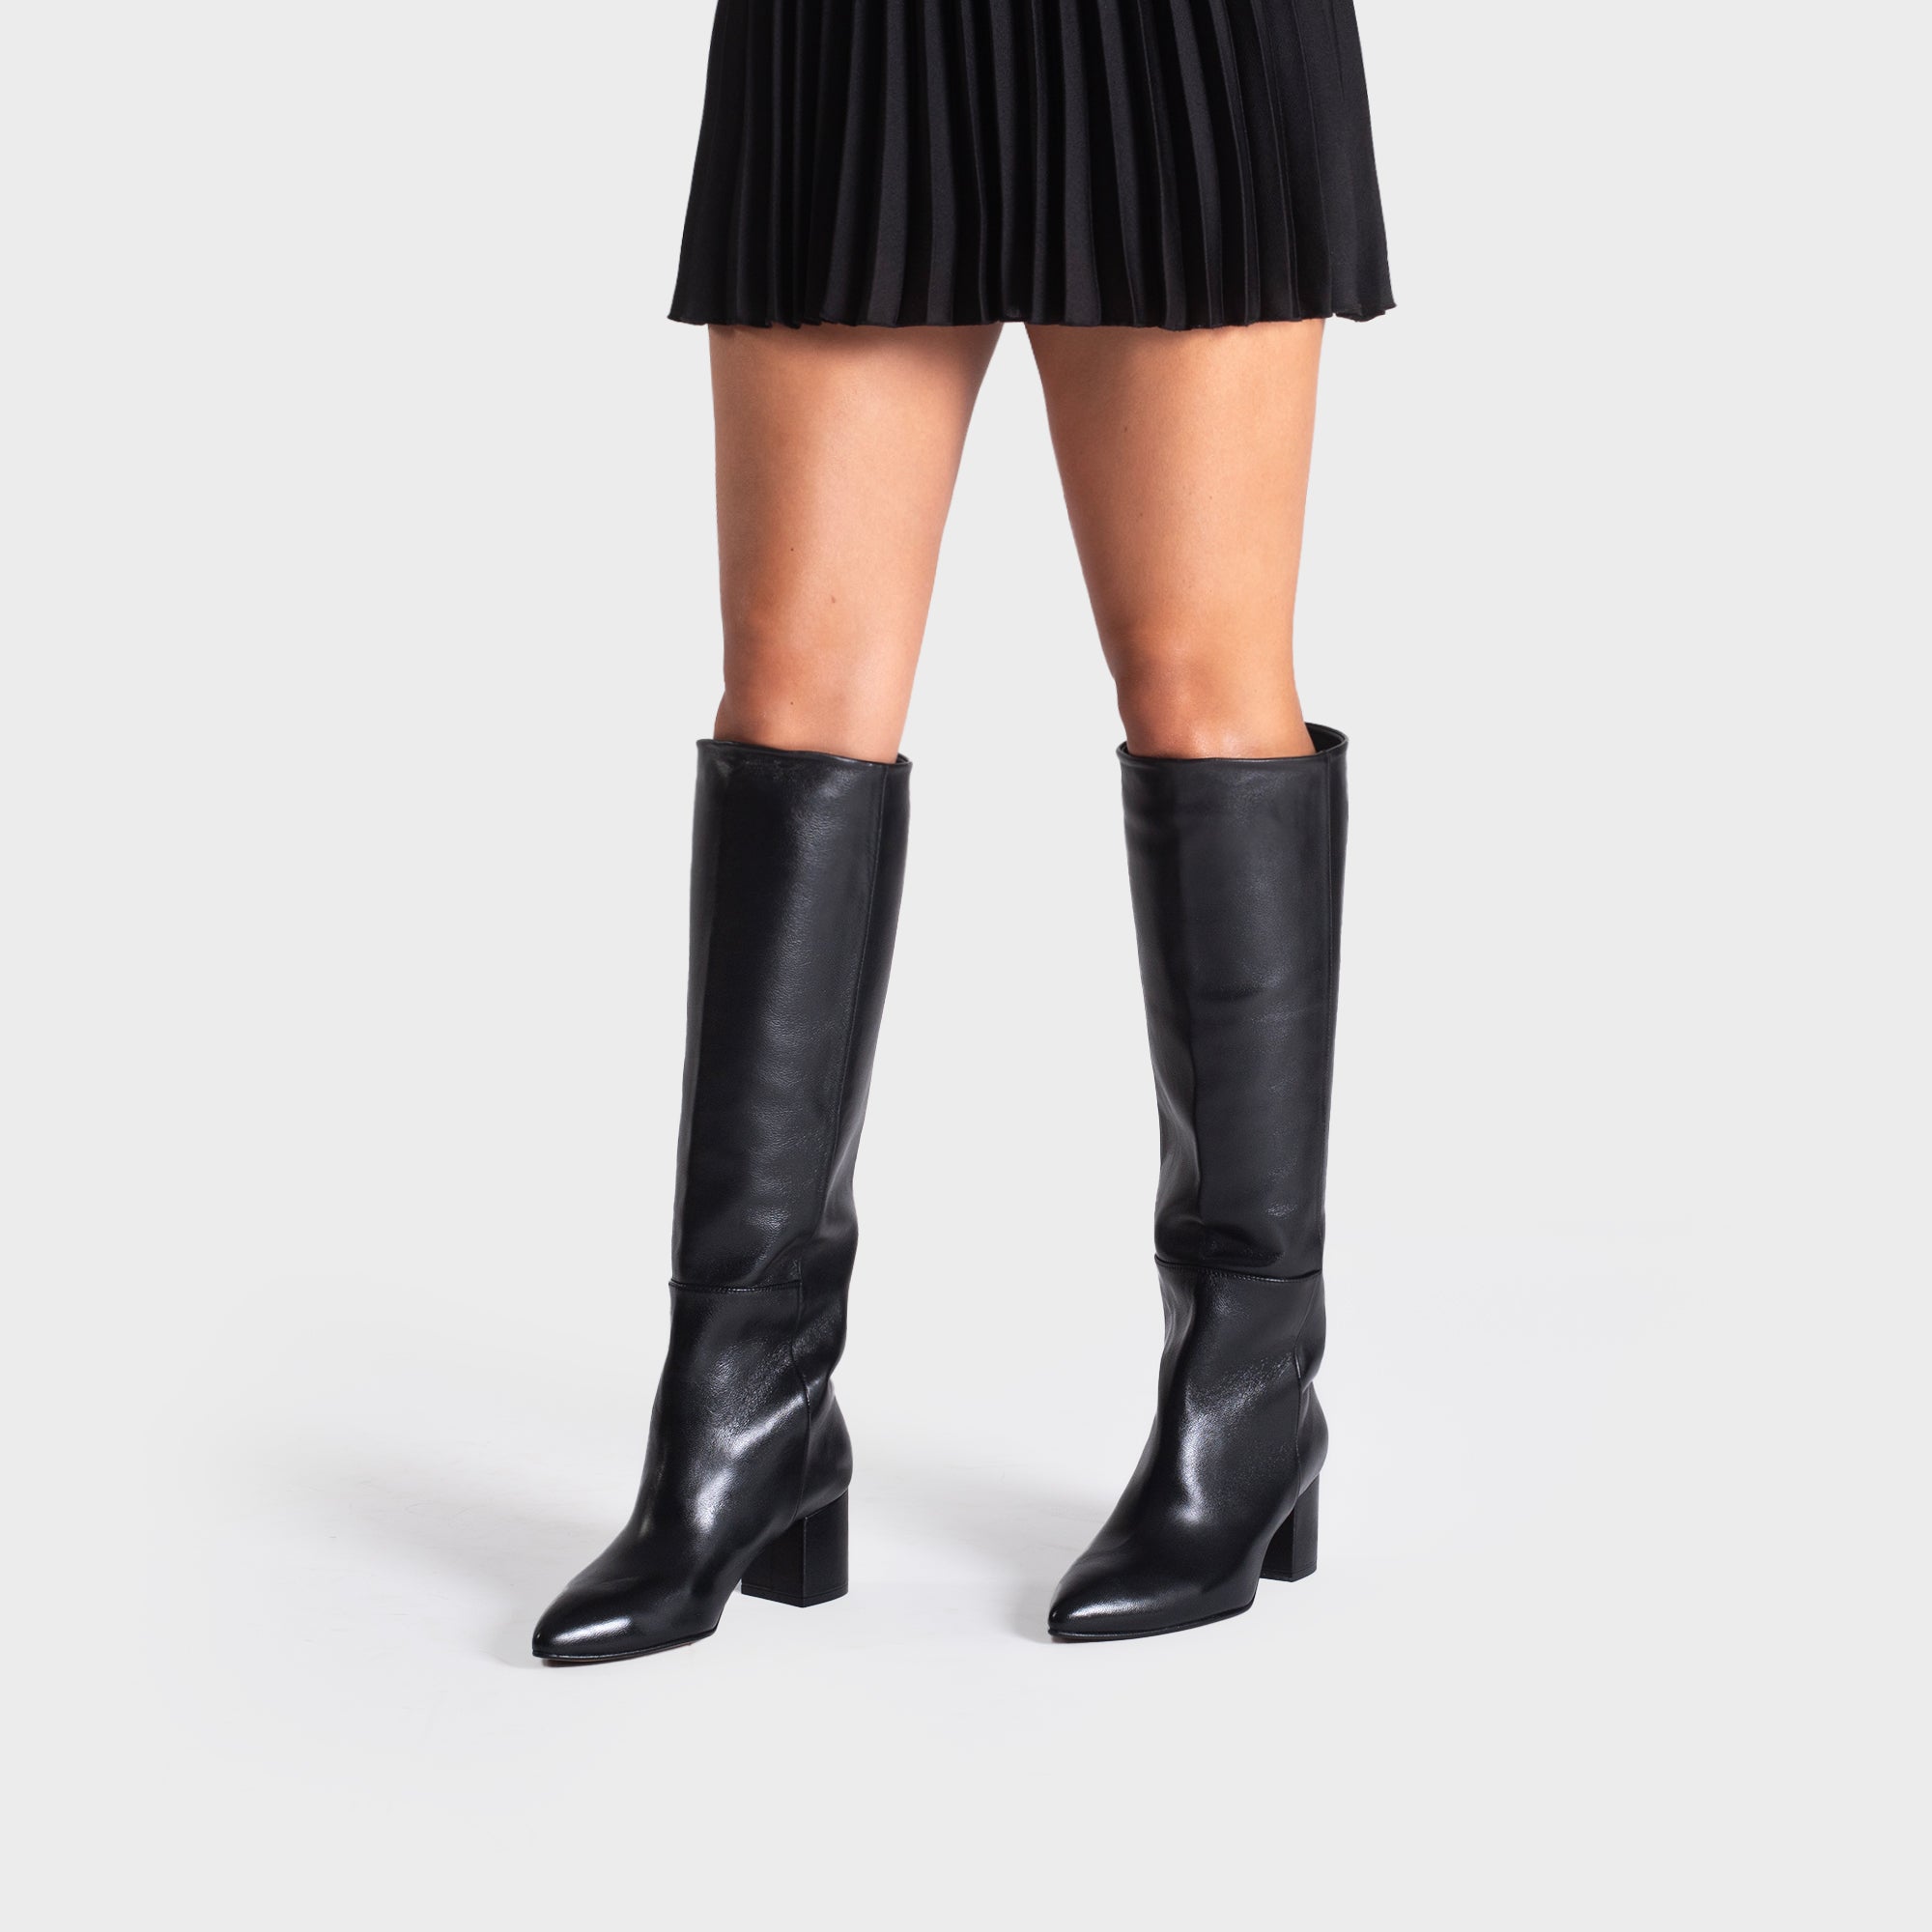 BLACK LEATHER TALL BOOTS